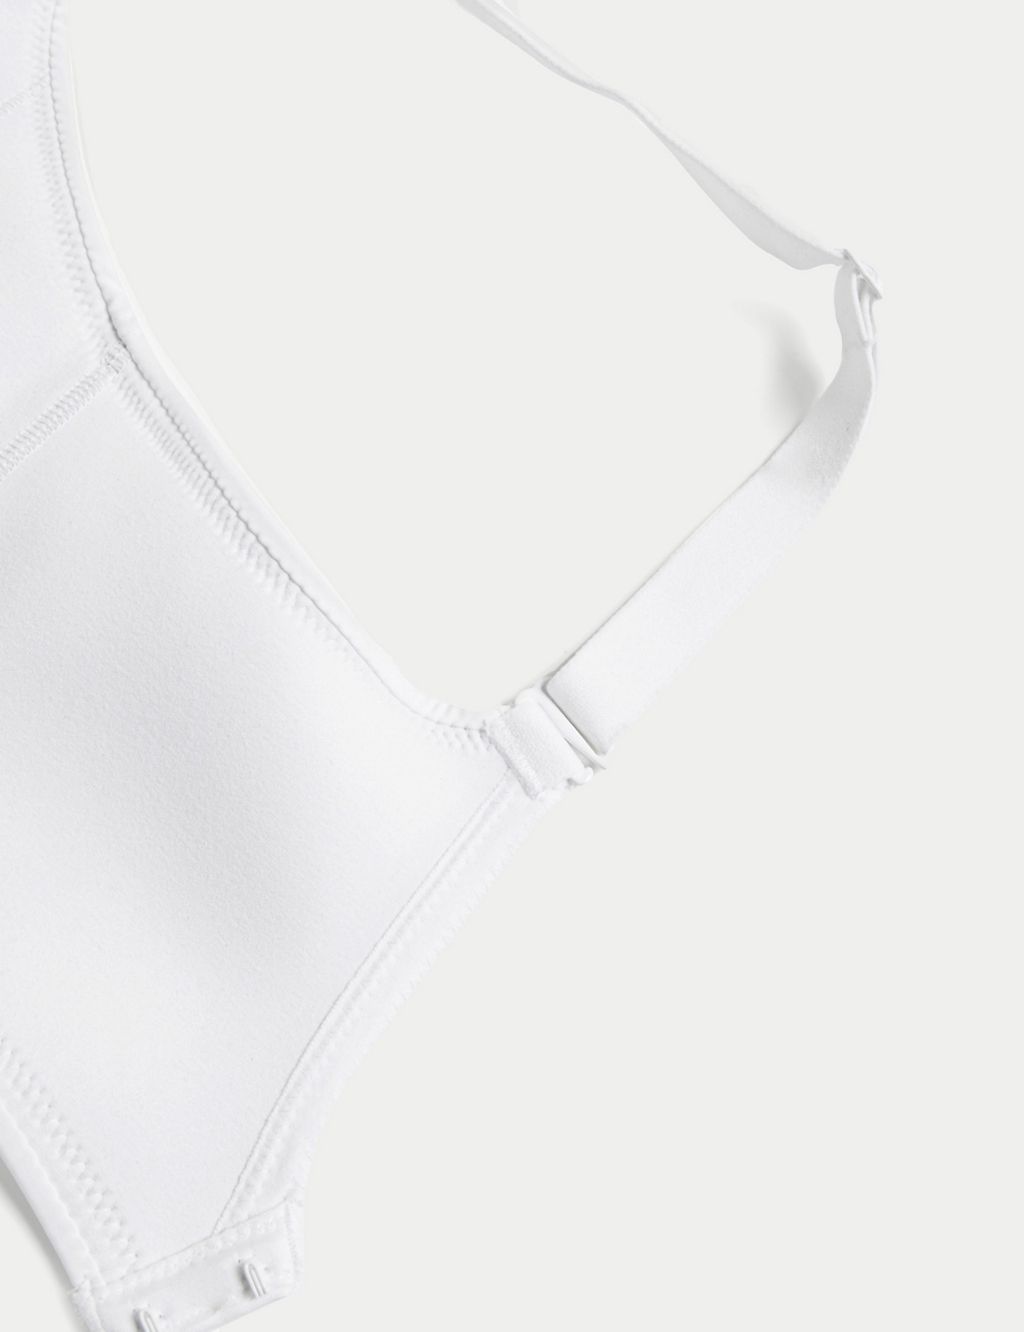 Flexifit™ Non Wired Full Cup Bra A-E 5 of 8